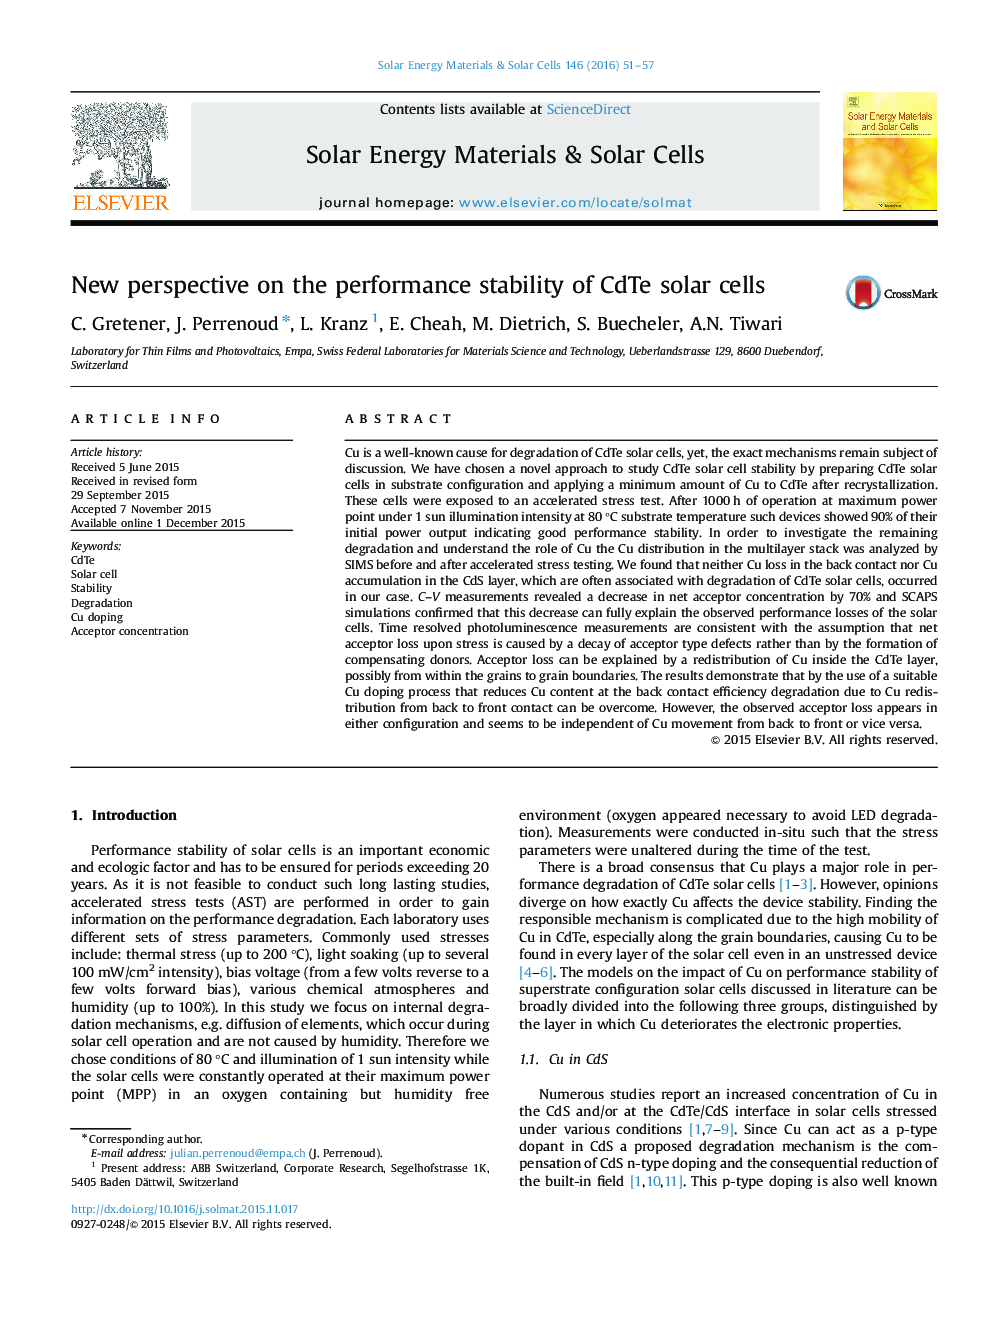 New perspective on the performance stability of CdTe solar cells